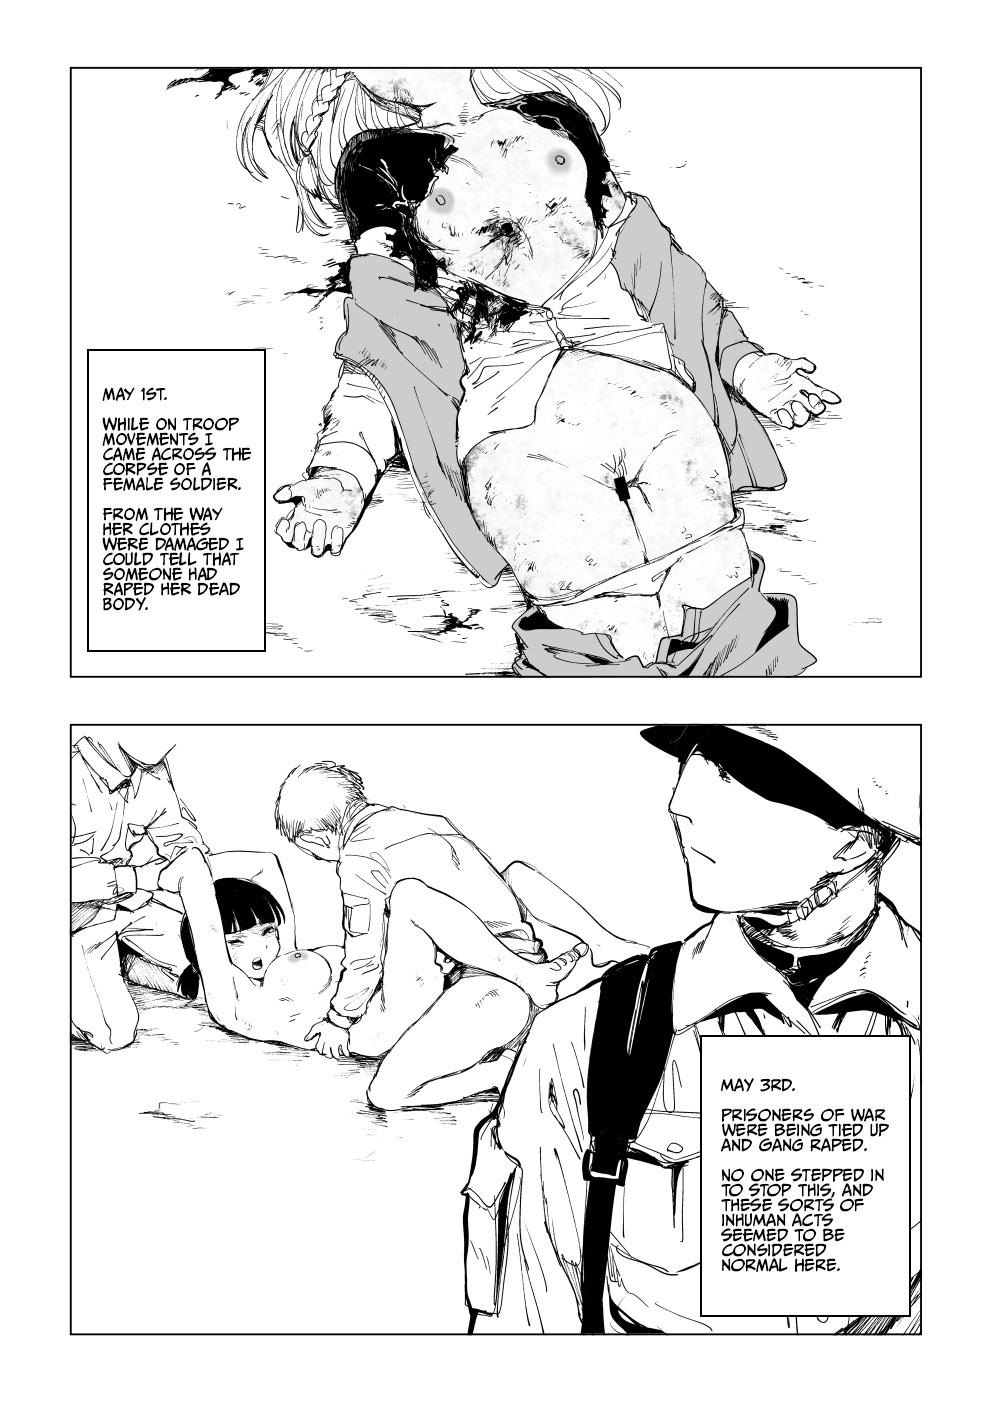 Amateur Teen Fallen on the Battlefield - The Memoirs of Private First Class Blaauw - Original Clothed Sex - Page 1